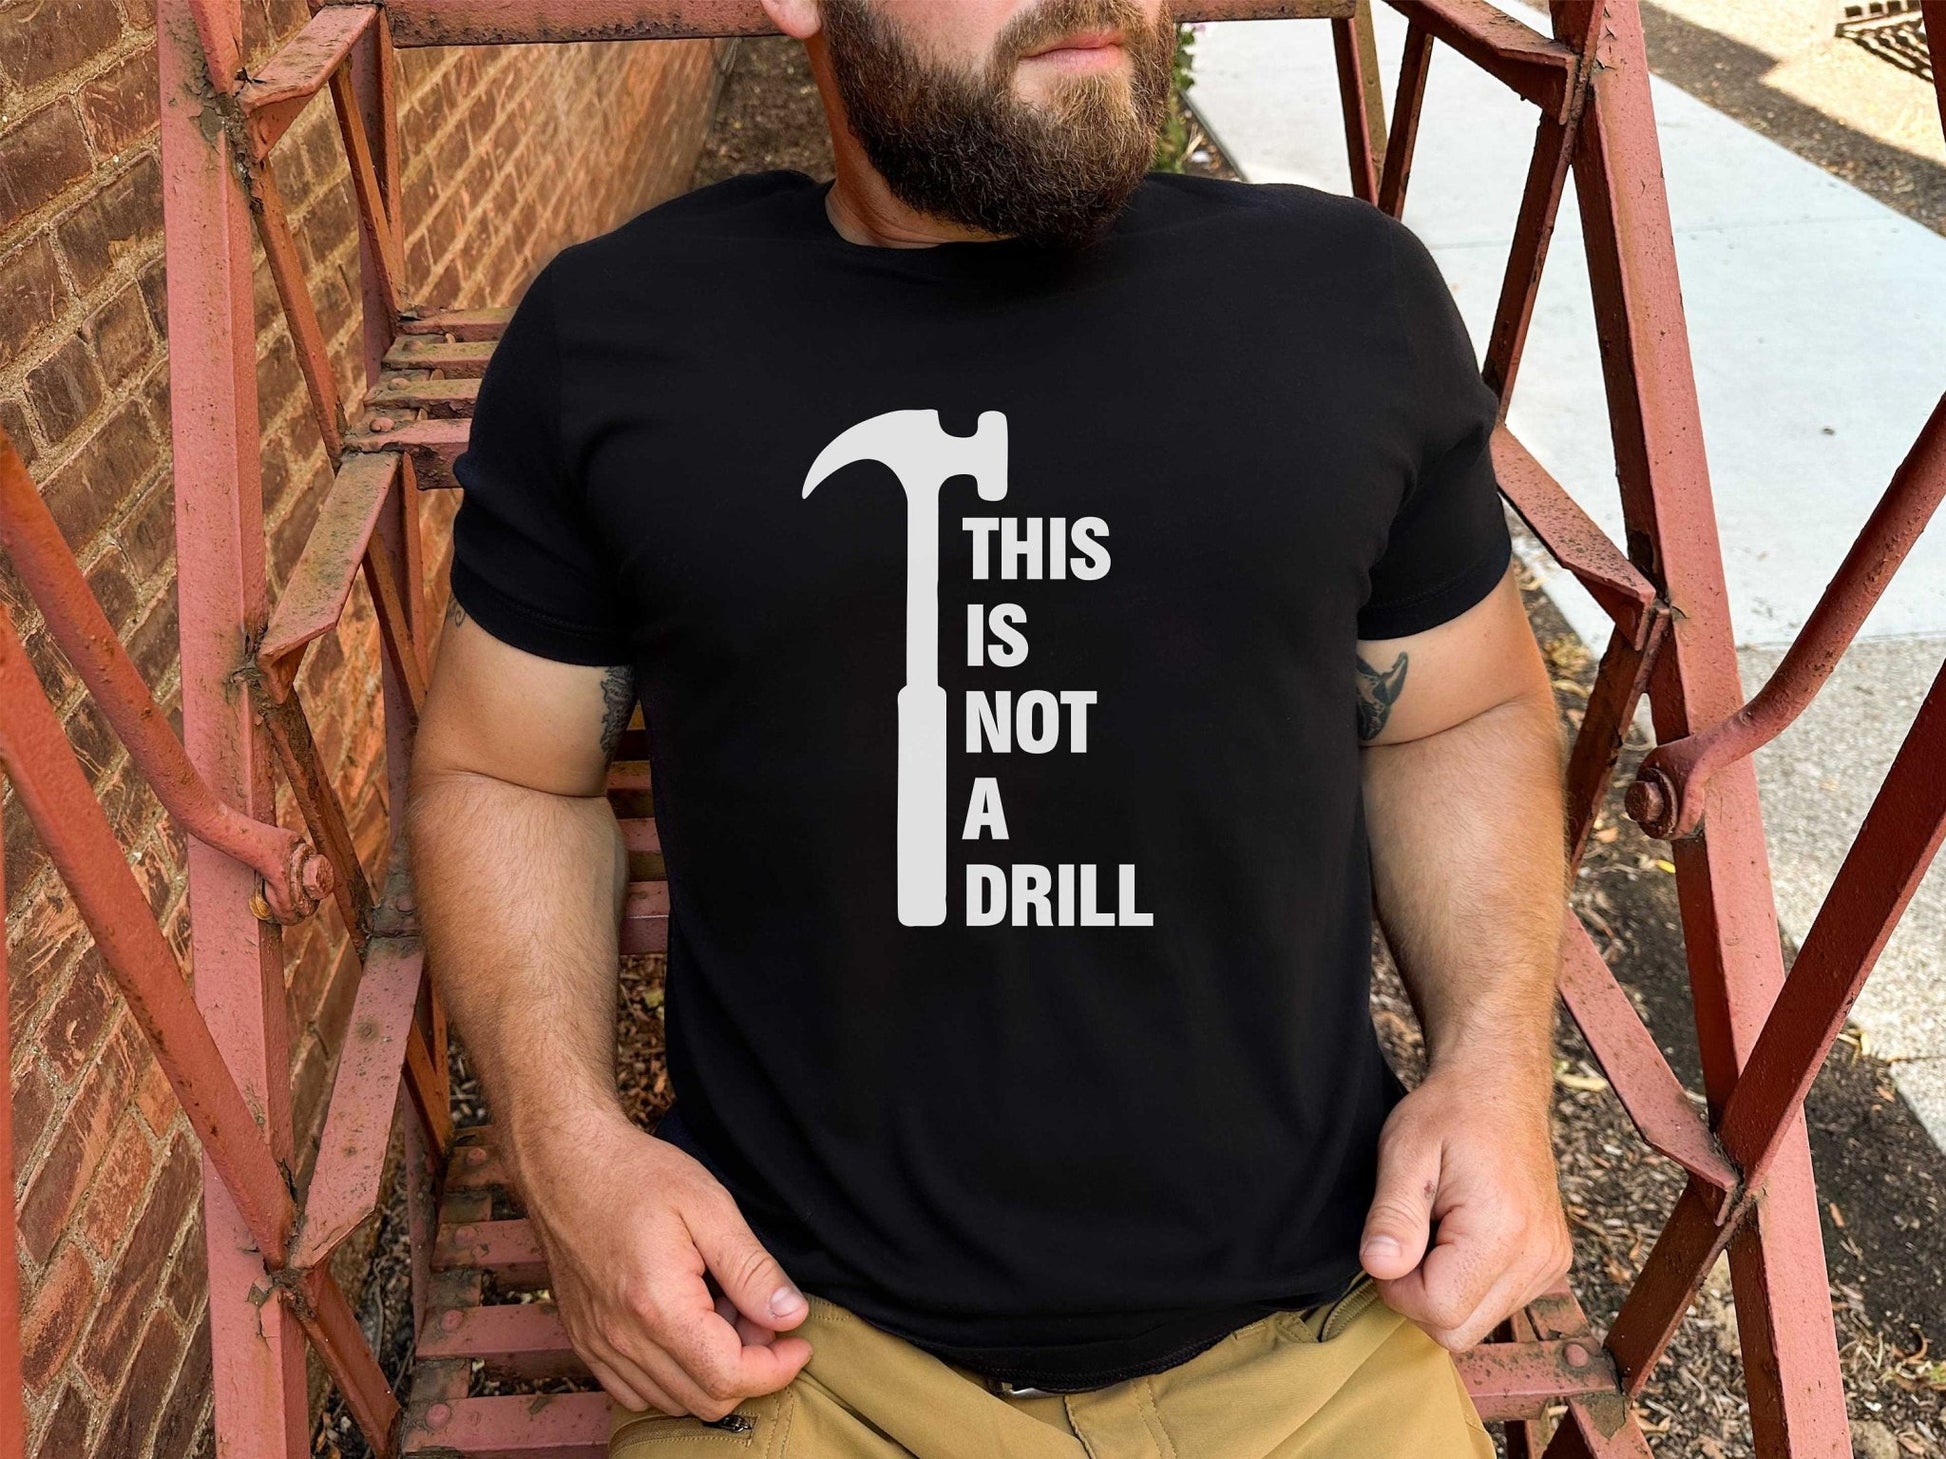 This Is Not A Drill Shirt, Dad Joke Shirt, Fathers Day Shirt, birthday gift for Dad, Handyman Shirt, Humor Carpenter Tee, plus size - SBS T Shop